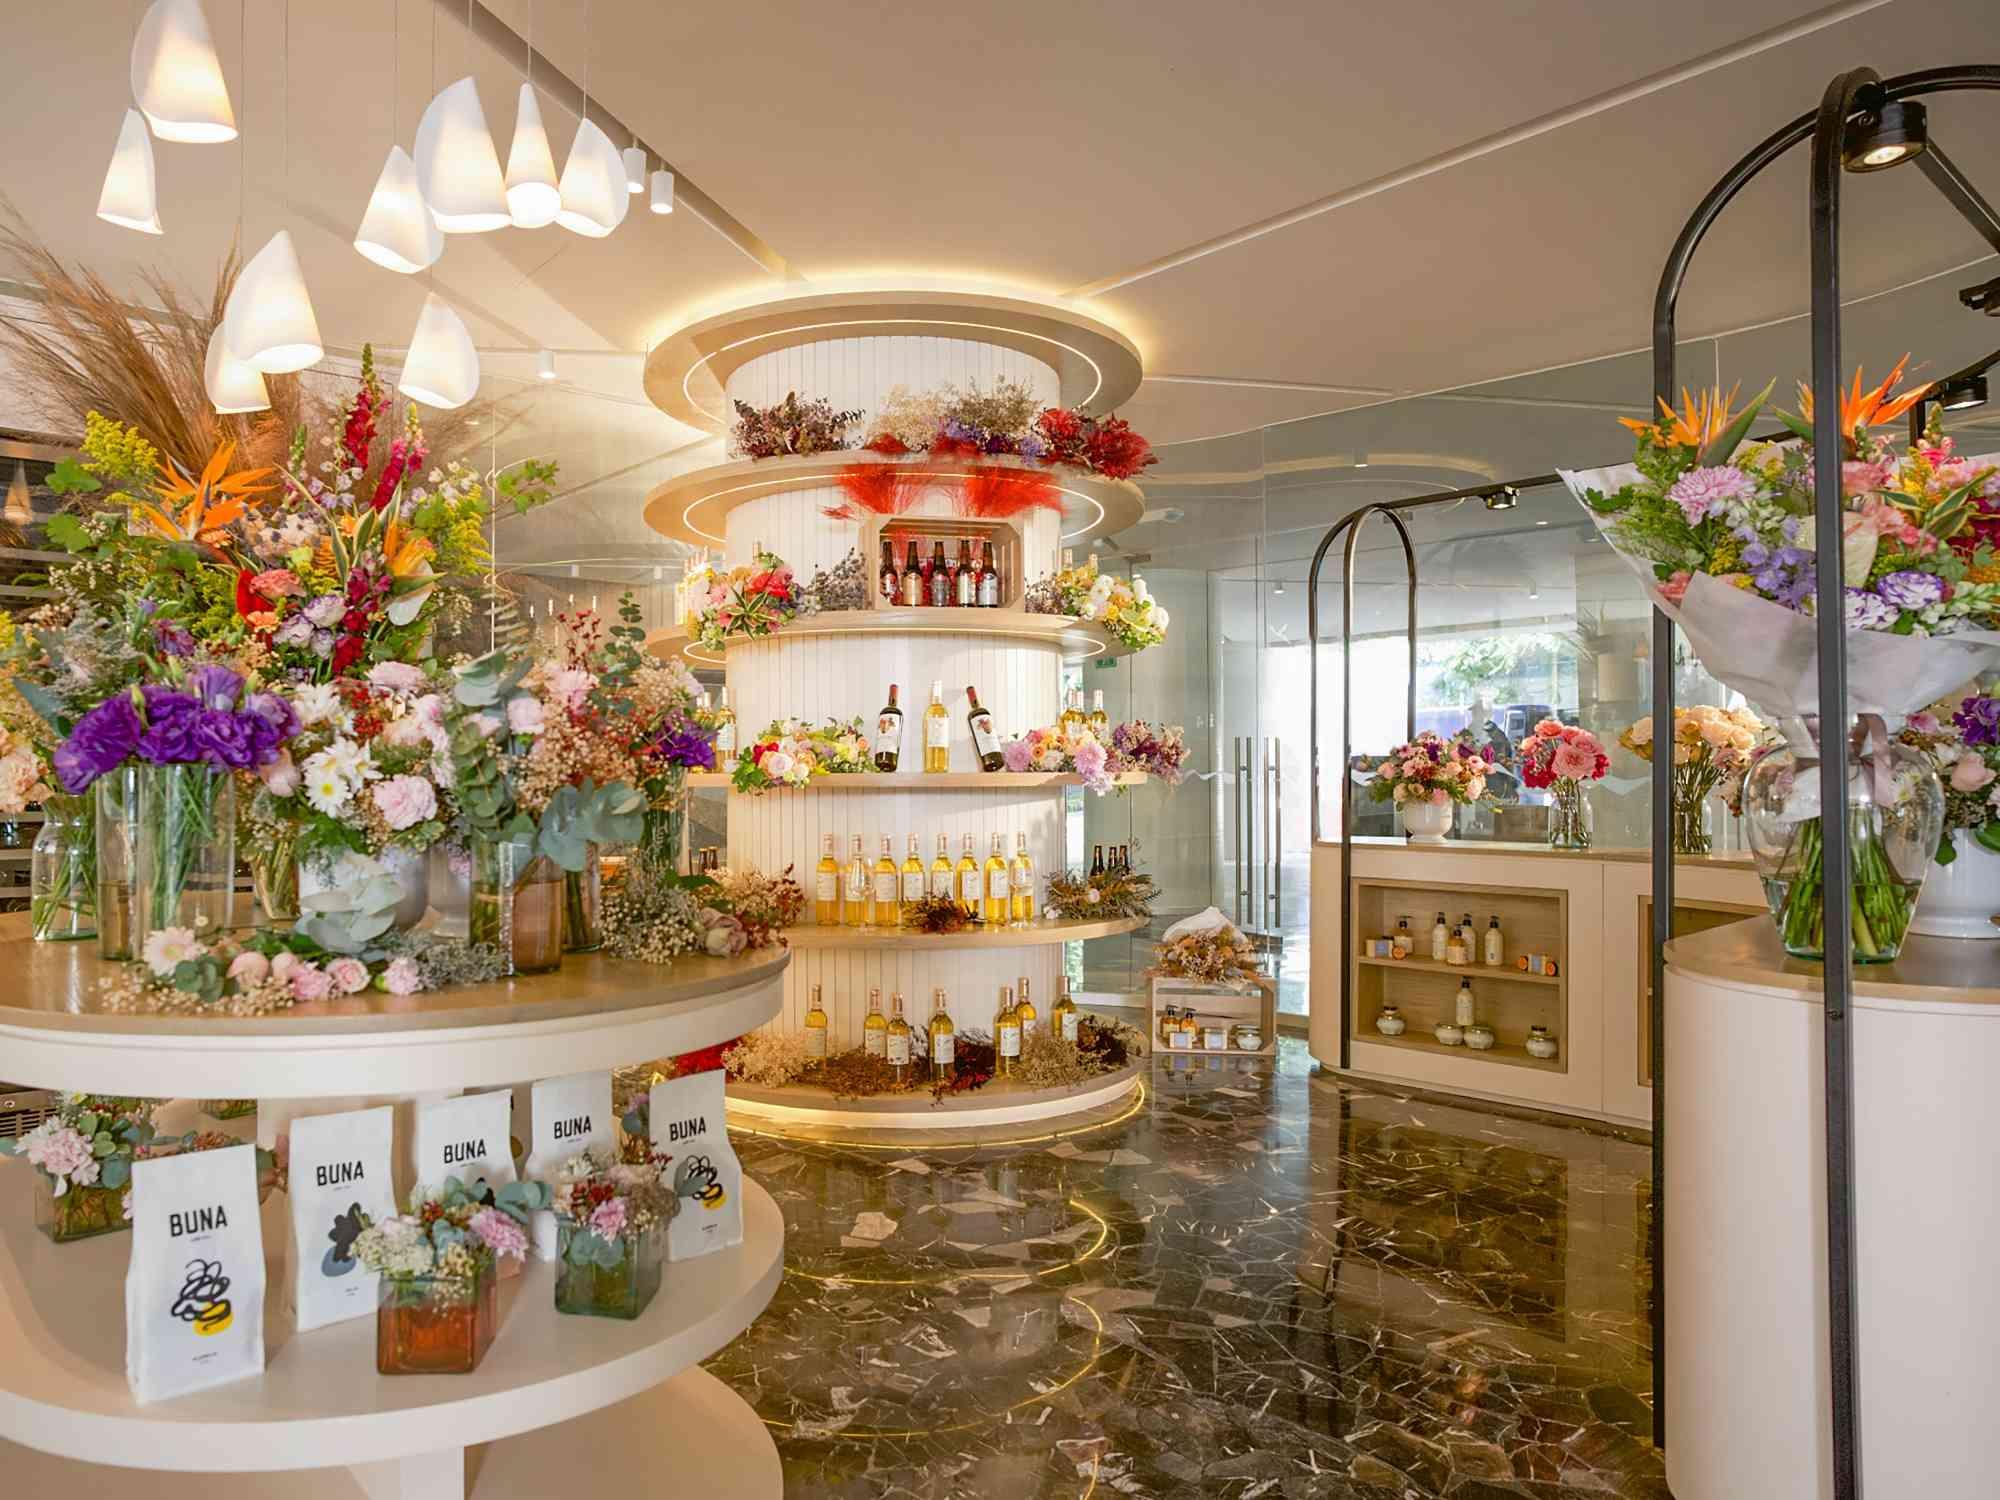 Interior of The Flower Shop filled with Flowers